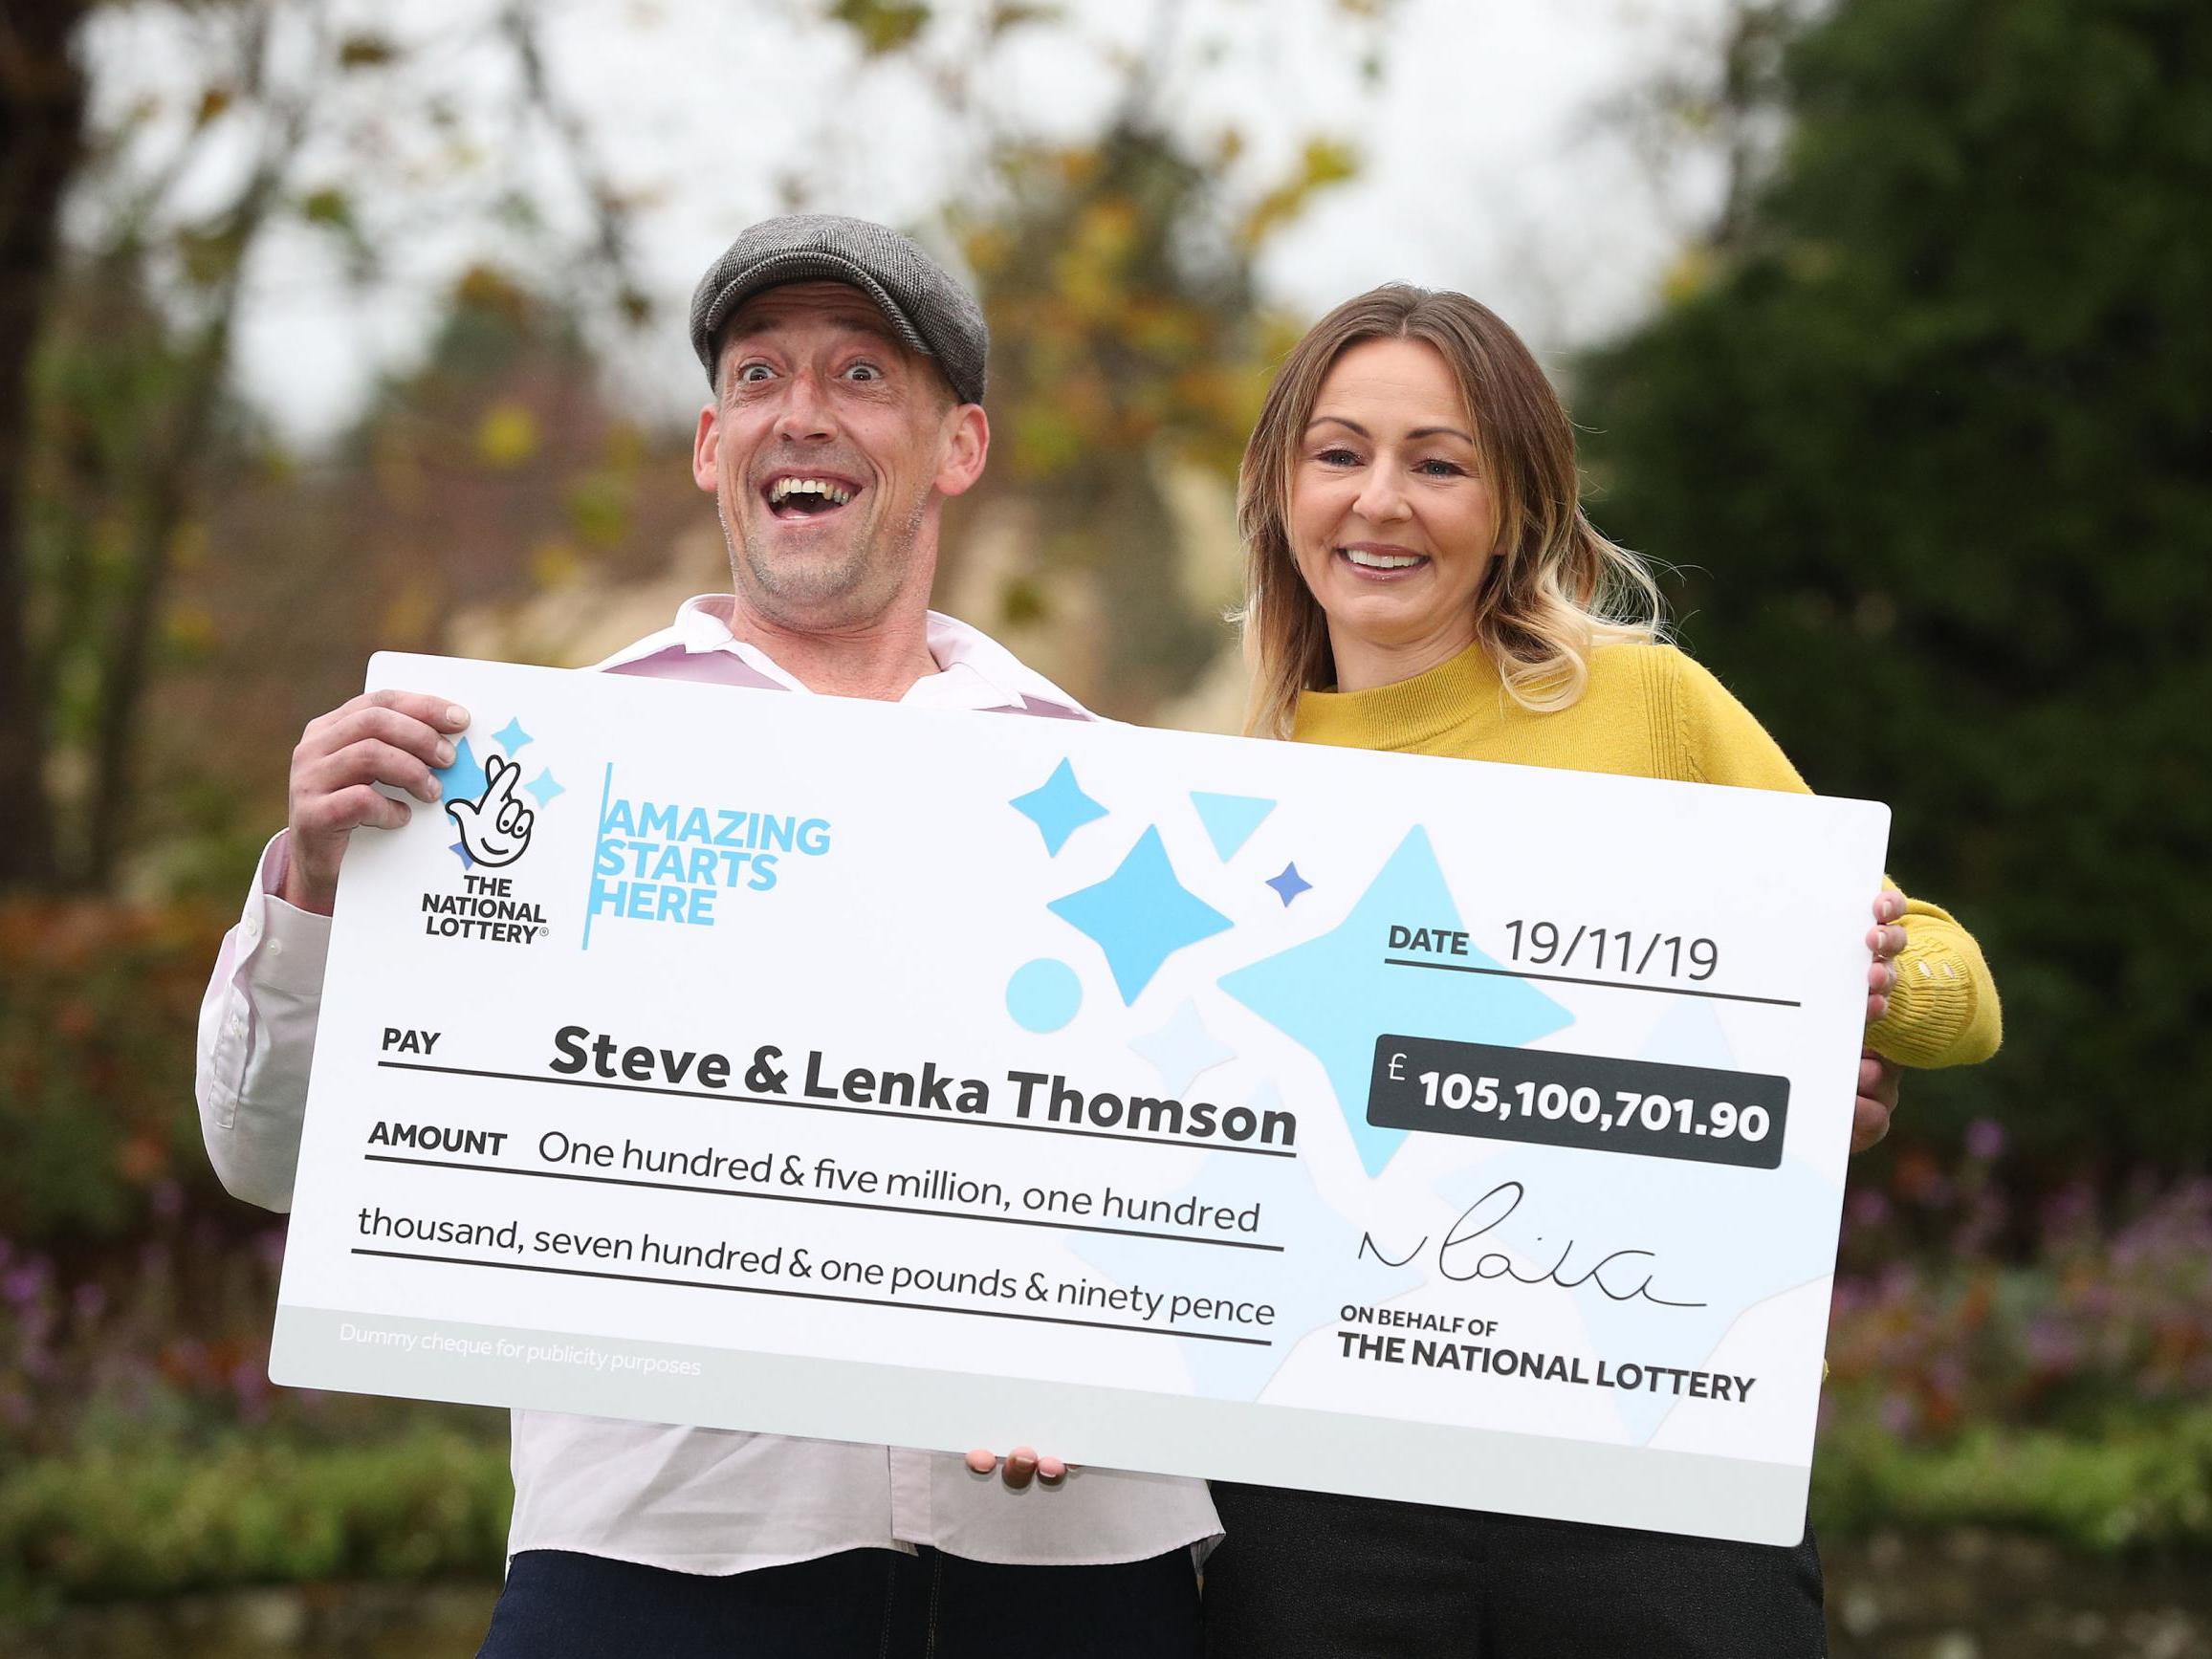 Self-employed builder Steve Thomson, 42, and his wife Lenka Thomson, 41, from Selsey, West Sussex, celebrate their win